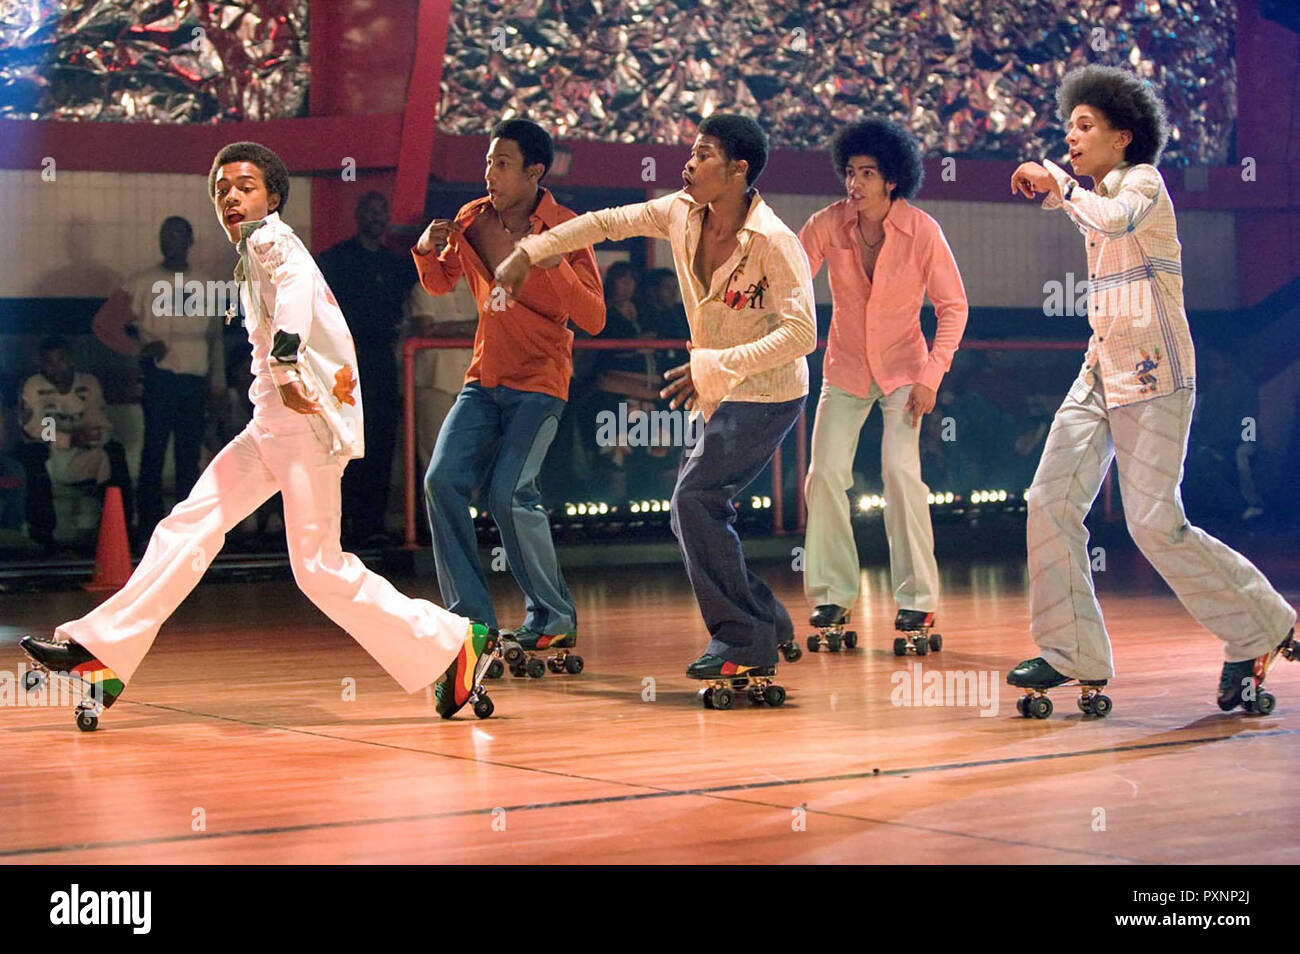 Roll Bounce, 2005 Regie: Malcolm D. Lee, It's the summer of 1978 and if you're looking for good times there ist just one place to go: the local roller disco: The Roller Skater: BOW WOW, BRANDON T. JACKSON, MARCUS T. PAULK, RICK GONZALES, KHLEO THOMAS Stock Photo